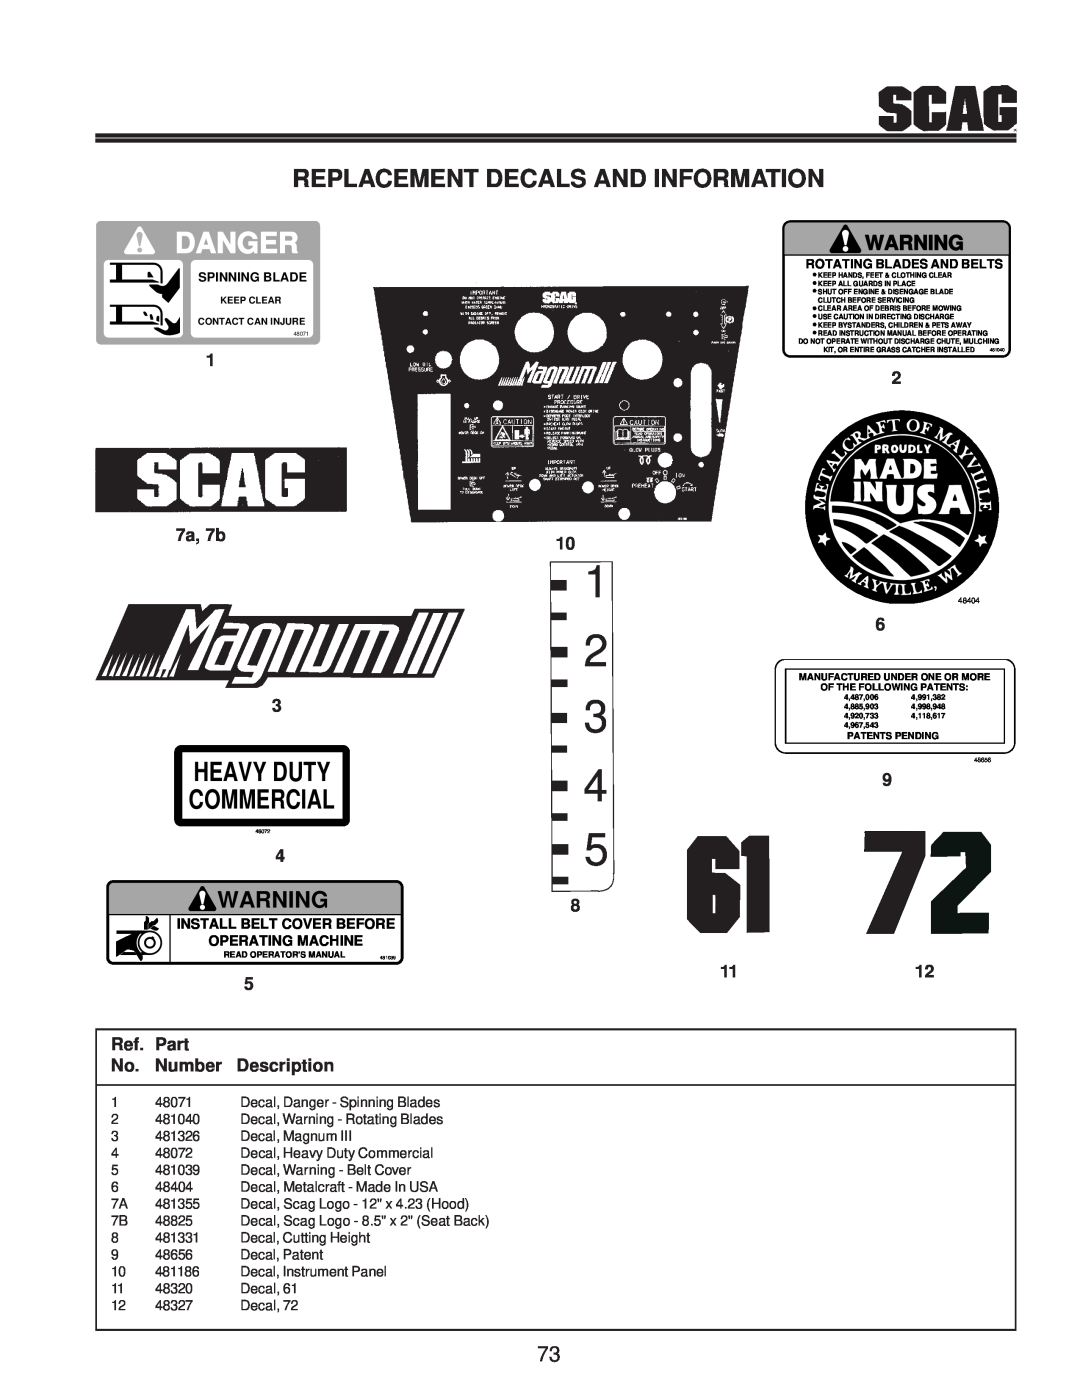 Scag Power Equipment MAG manual Replacement Decals And Information, Danger, Heavy Duty Commercial, 7a, 7b 